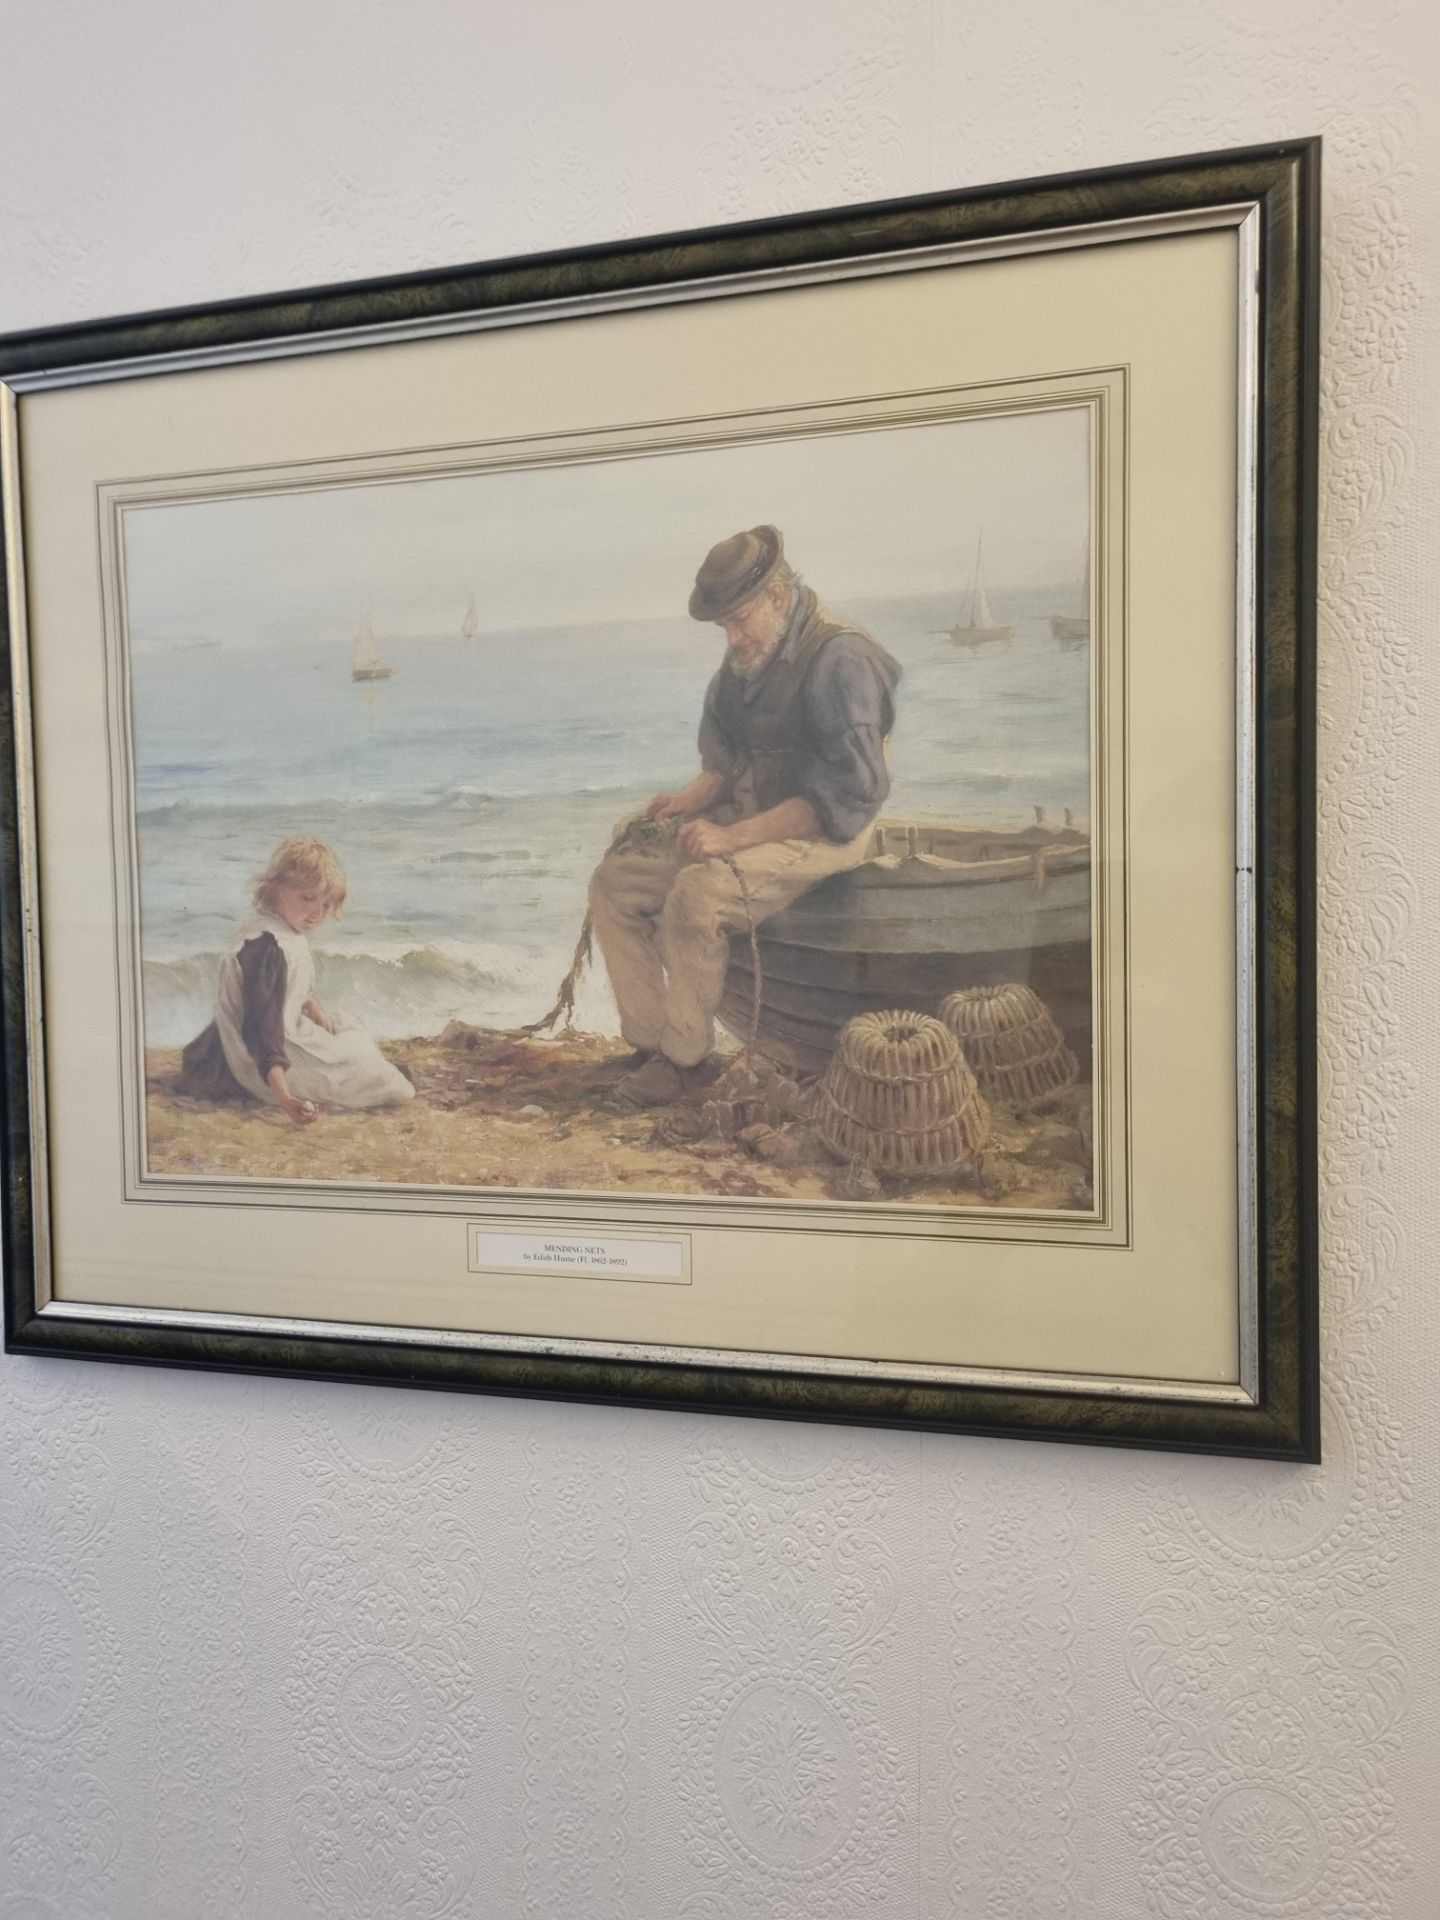 Mending Nets By Edith Hume (1862-1892) Framed Print In Black and Silver Frame 550mm 450mm